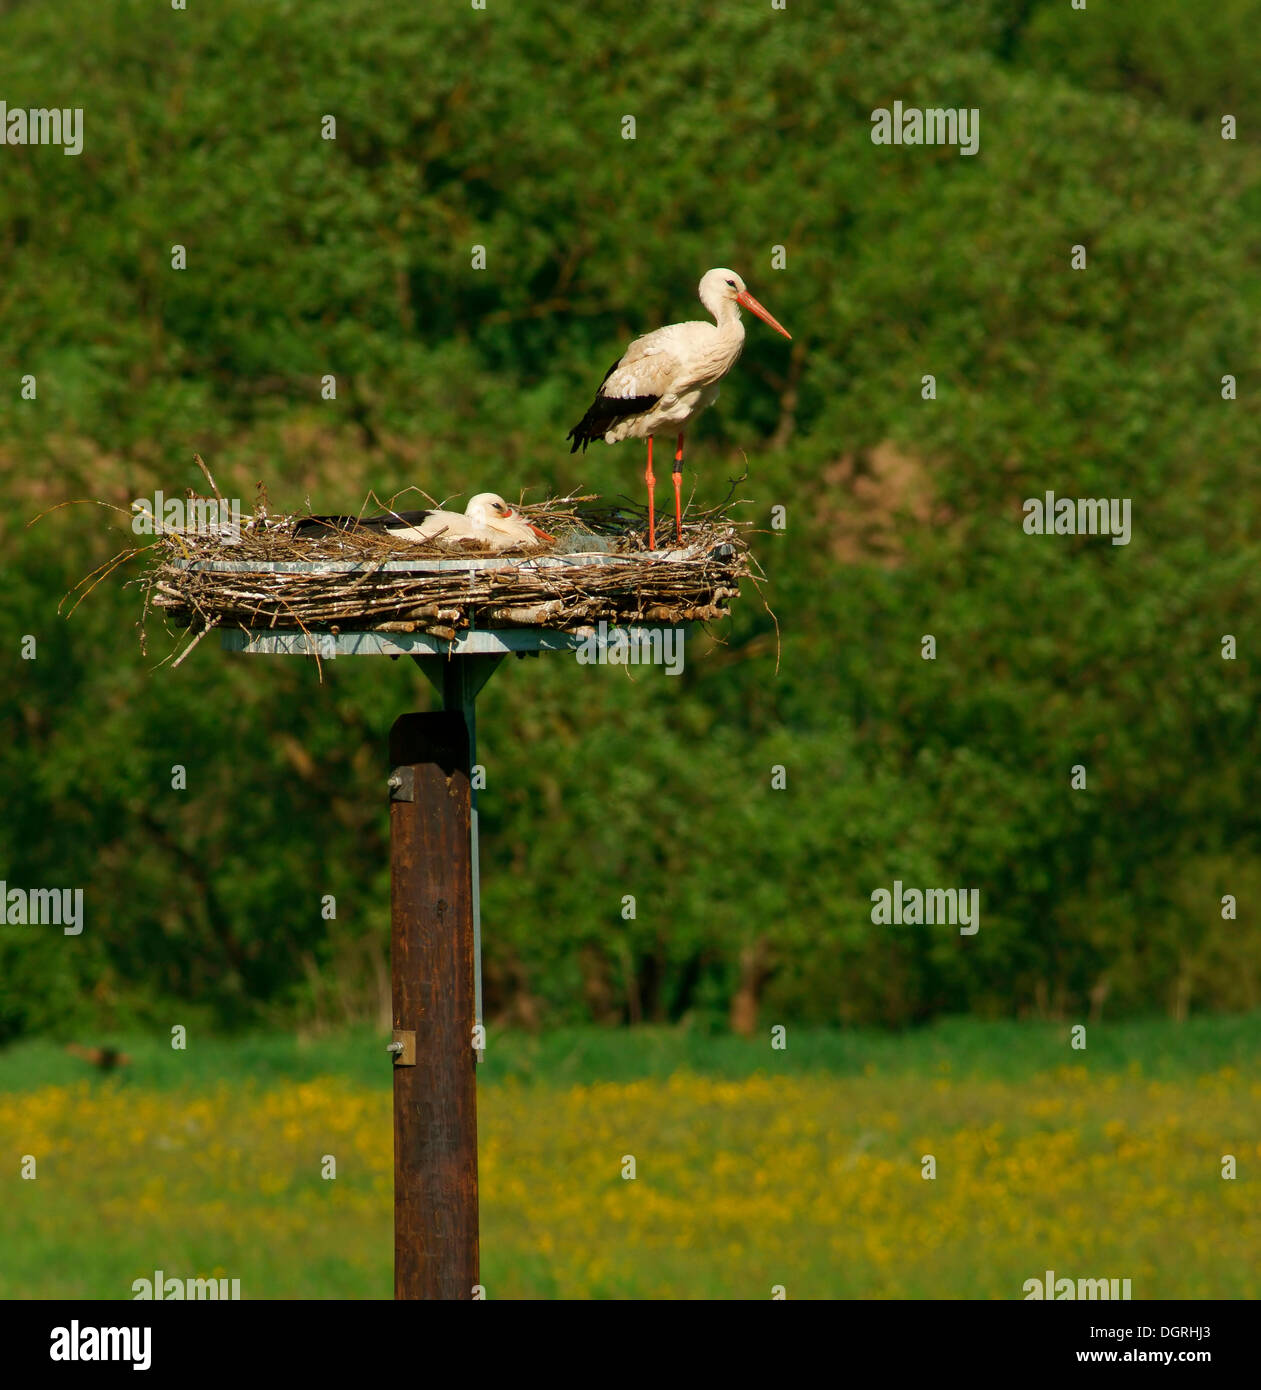 White storks (Ciconia ciconia) on the nest, Solms, Bad Hersfeld, Hesse, Germany Stock Photo